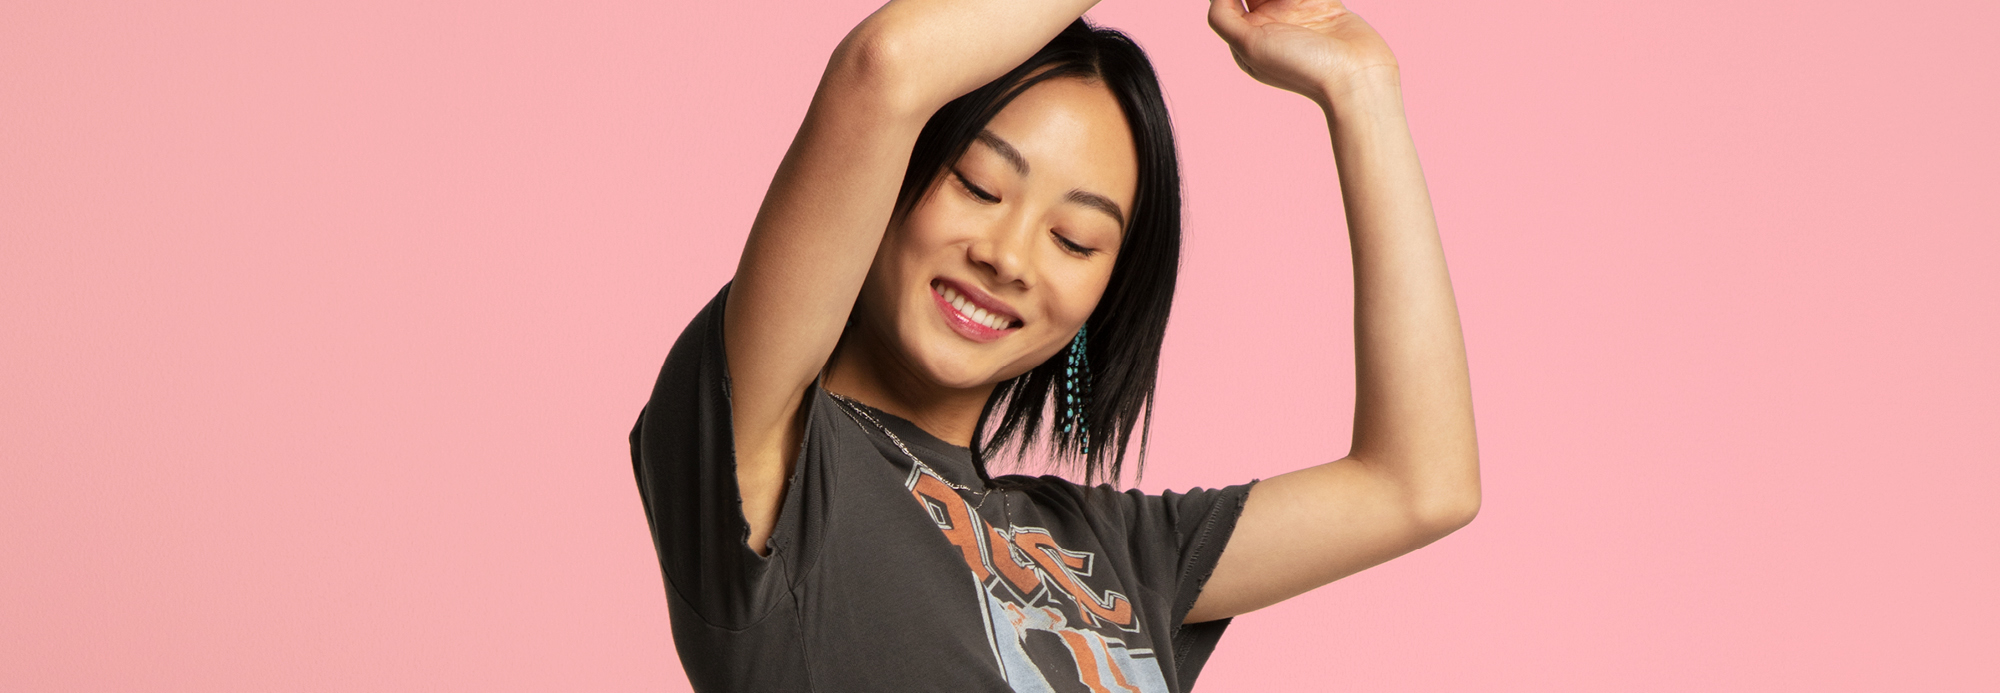 Girl raising her arms up and smiling. Background is pink.